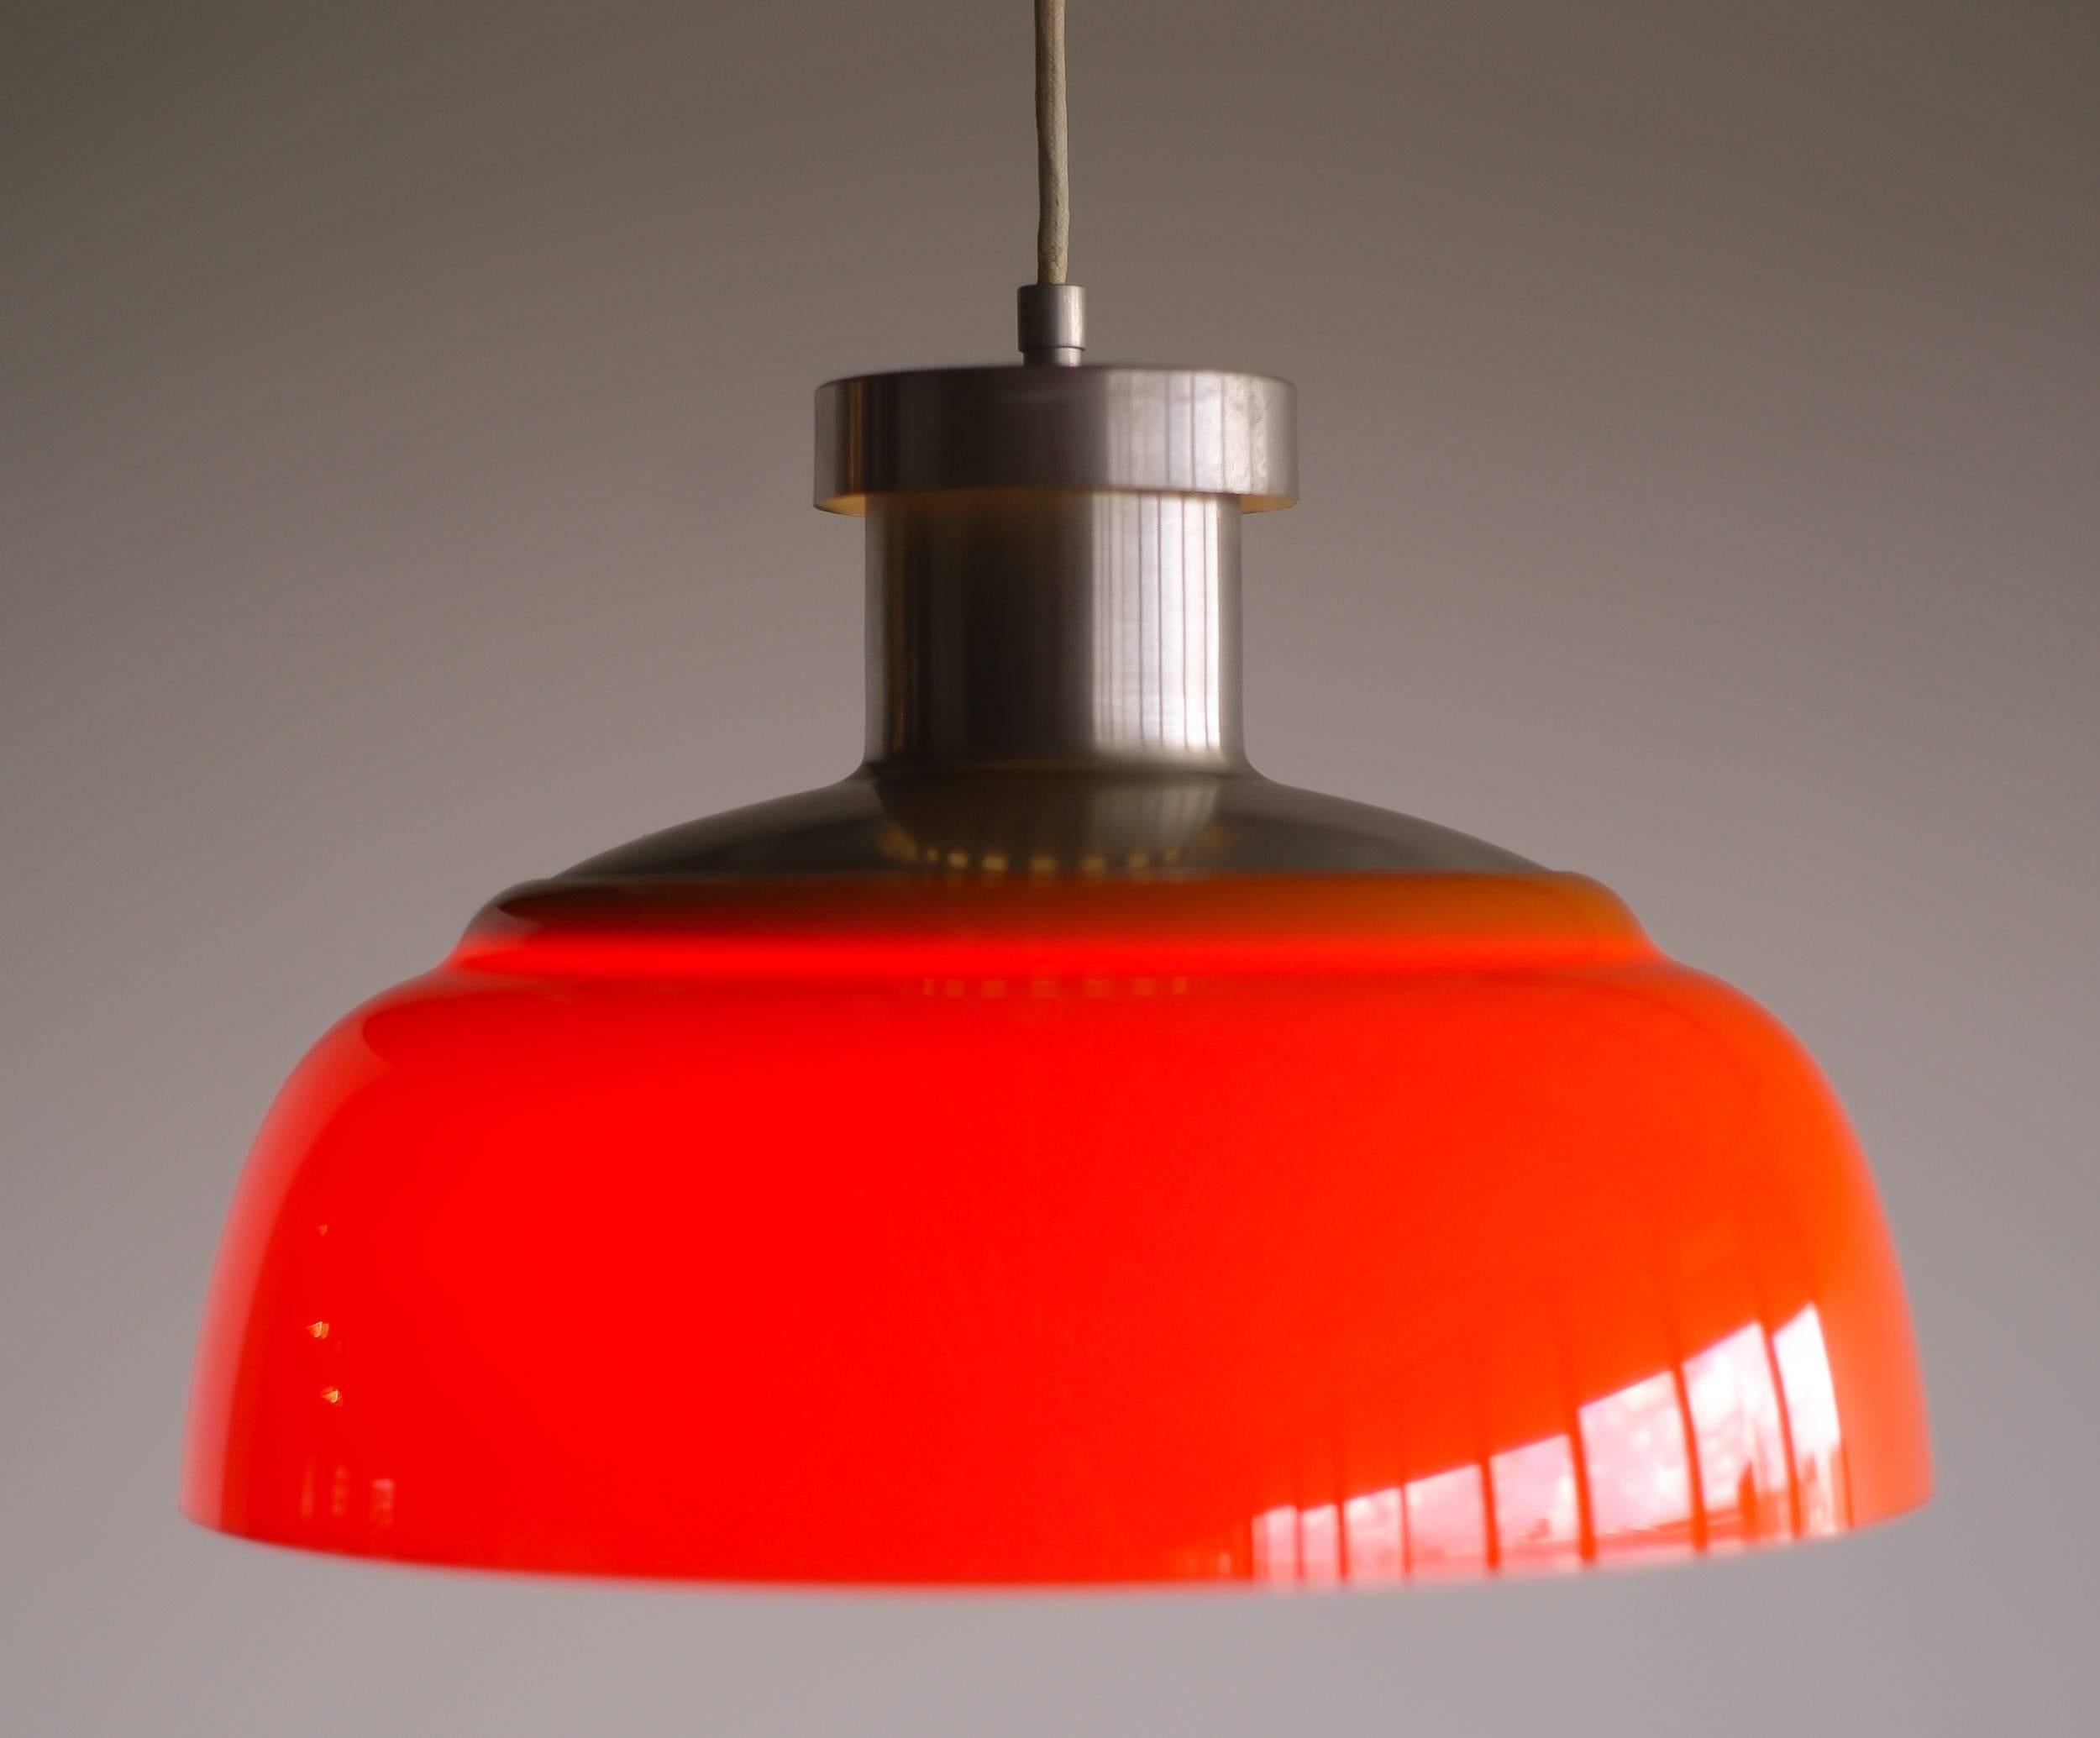 Rare pendant, this was the first lighting design by Achille Castiglioni.
Made of nickel-plated steel with an acrylic shade it looks very contemporary, but it is vintage Mid-Century Modern!

Excellent fast and affordable worldwide shipping.